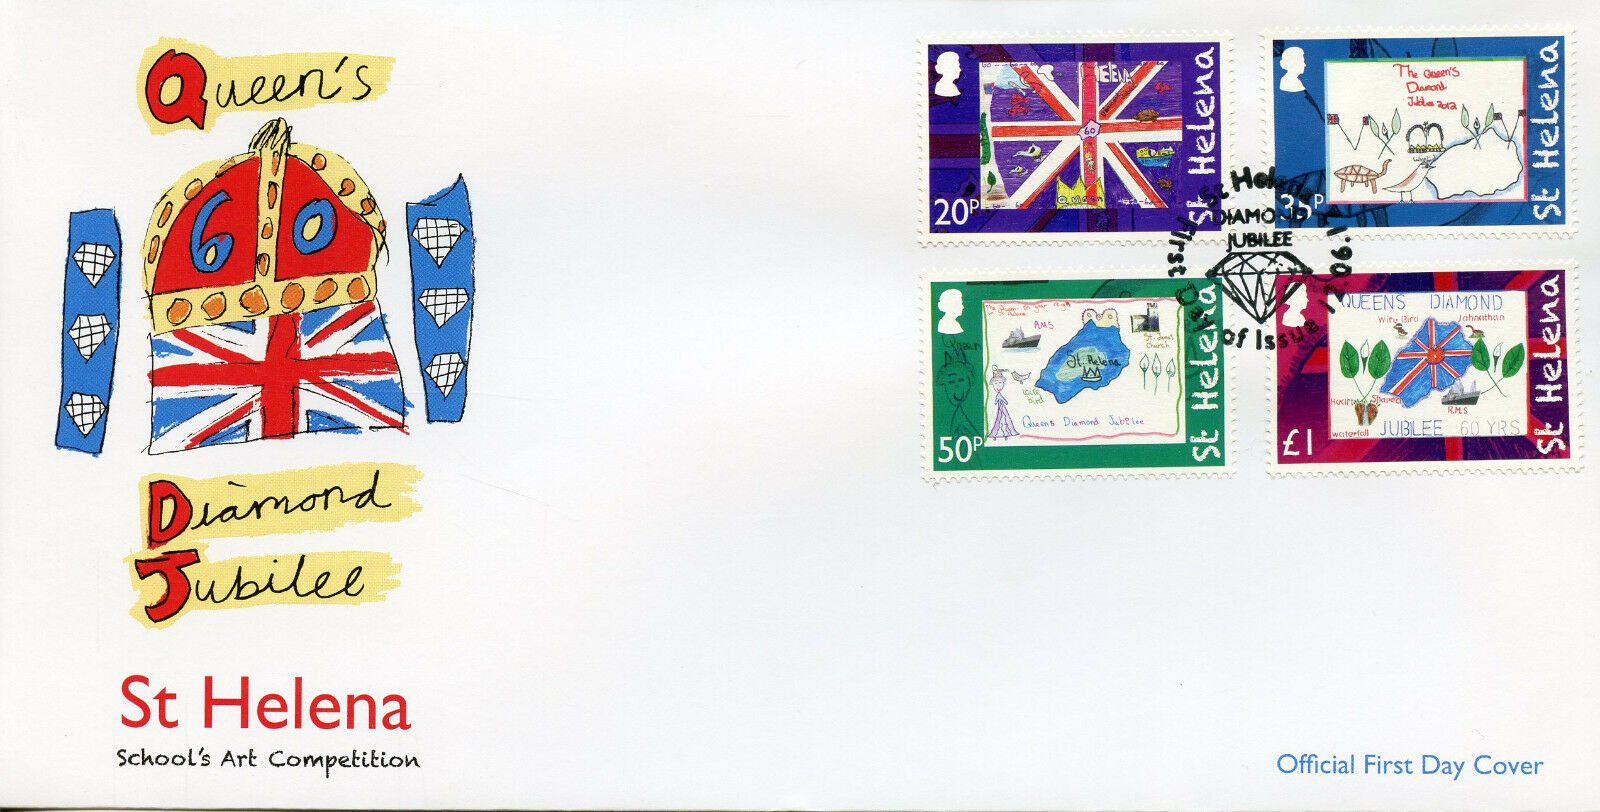 St Helena 2012 FDC Queen's Diamond Jubilee School Art 4v Cover Royalty Stamps